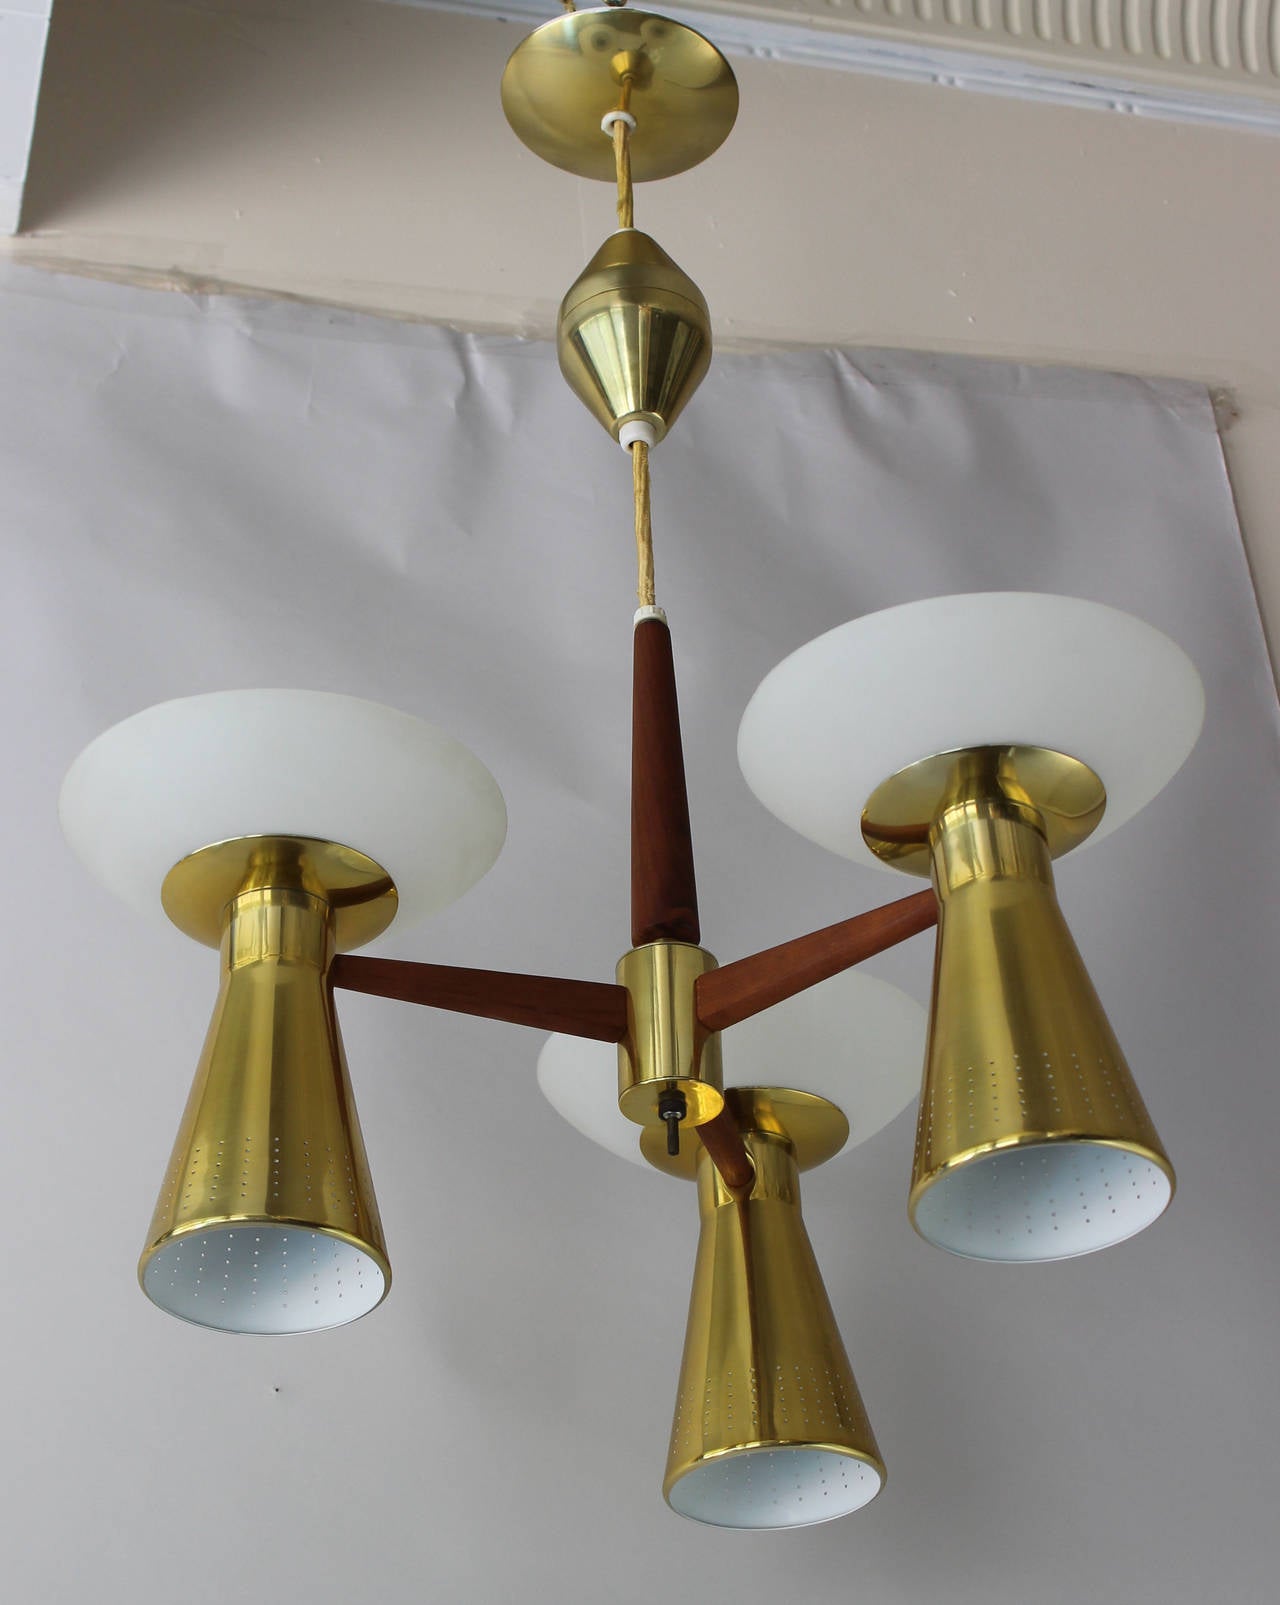 A brass and teak pendant chandelier with milk glass diffusers in the style of Paavo Tynell. Six sockets.

18 inch expandable-retractable rope.

complementary delivery within 30 miles.